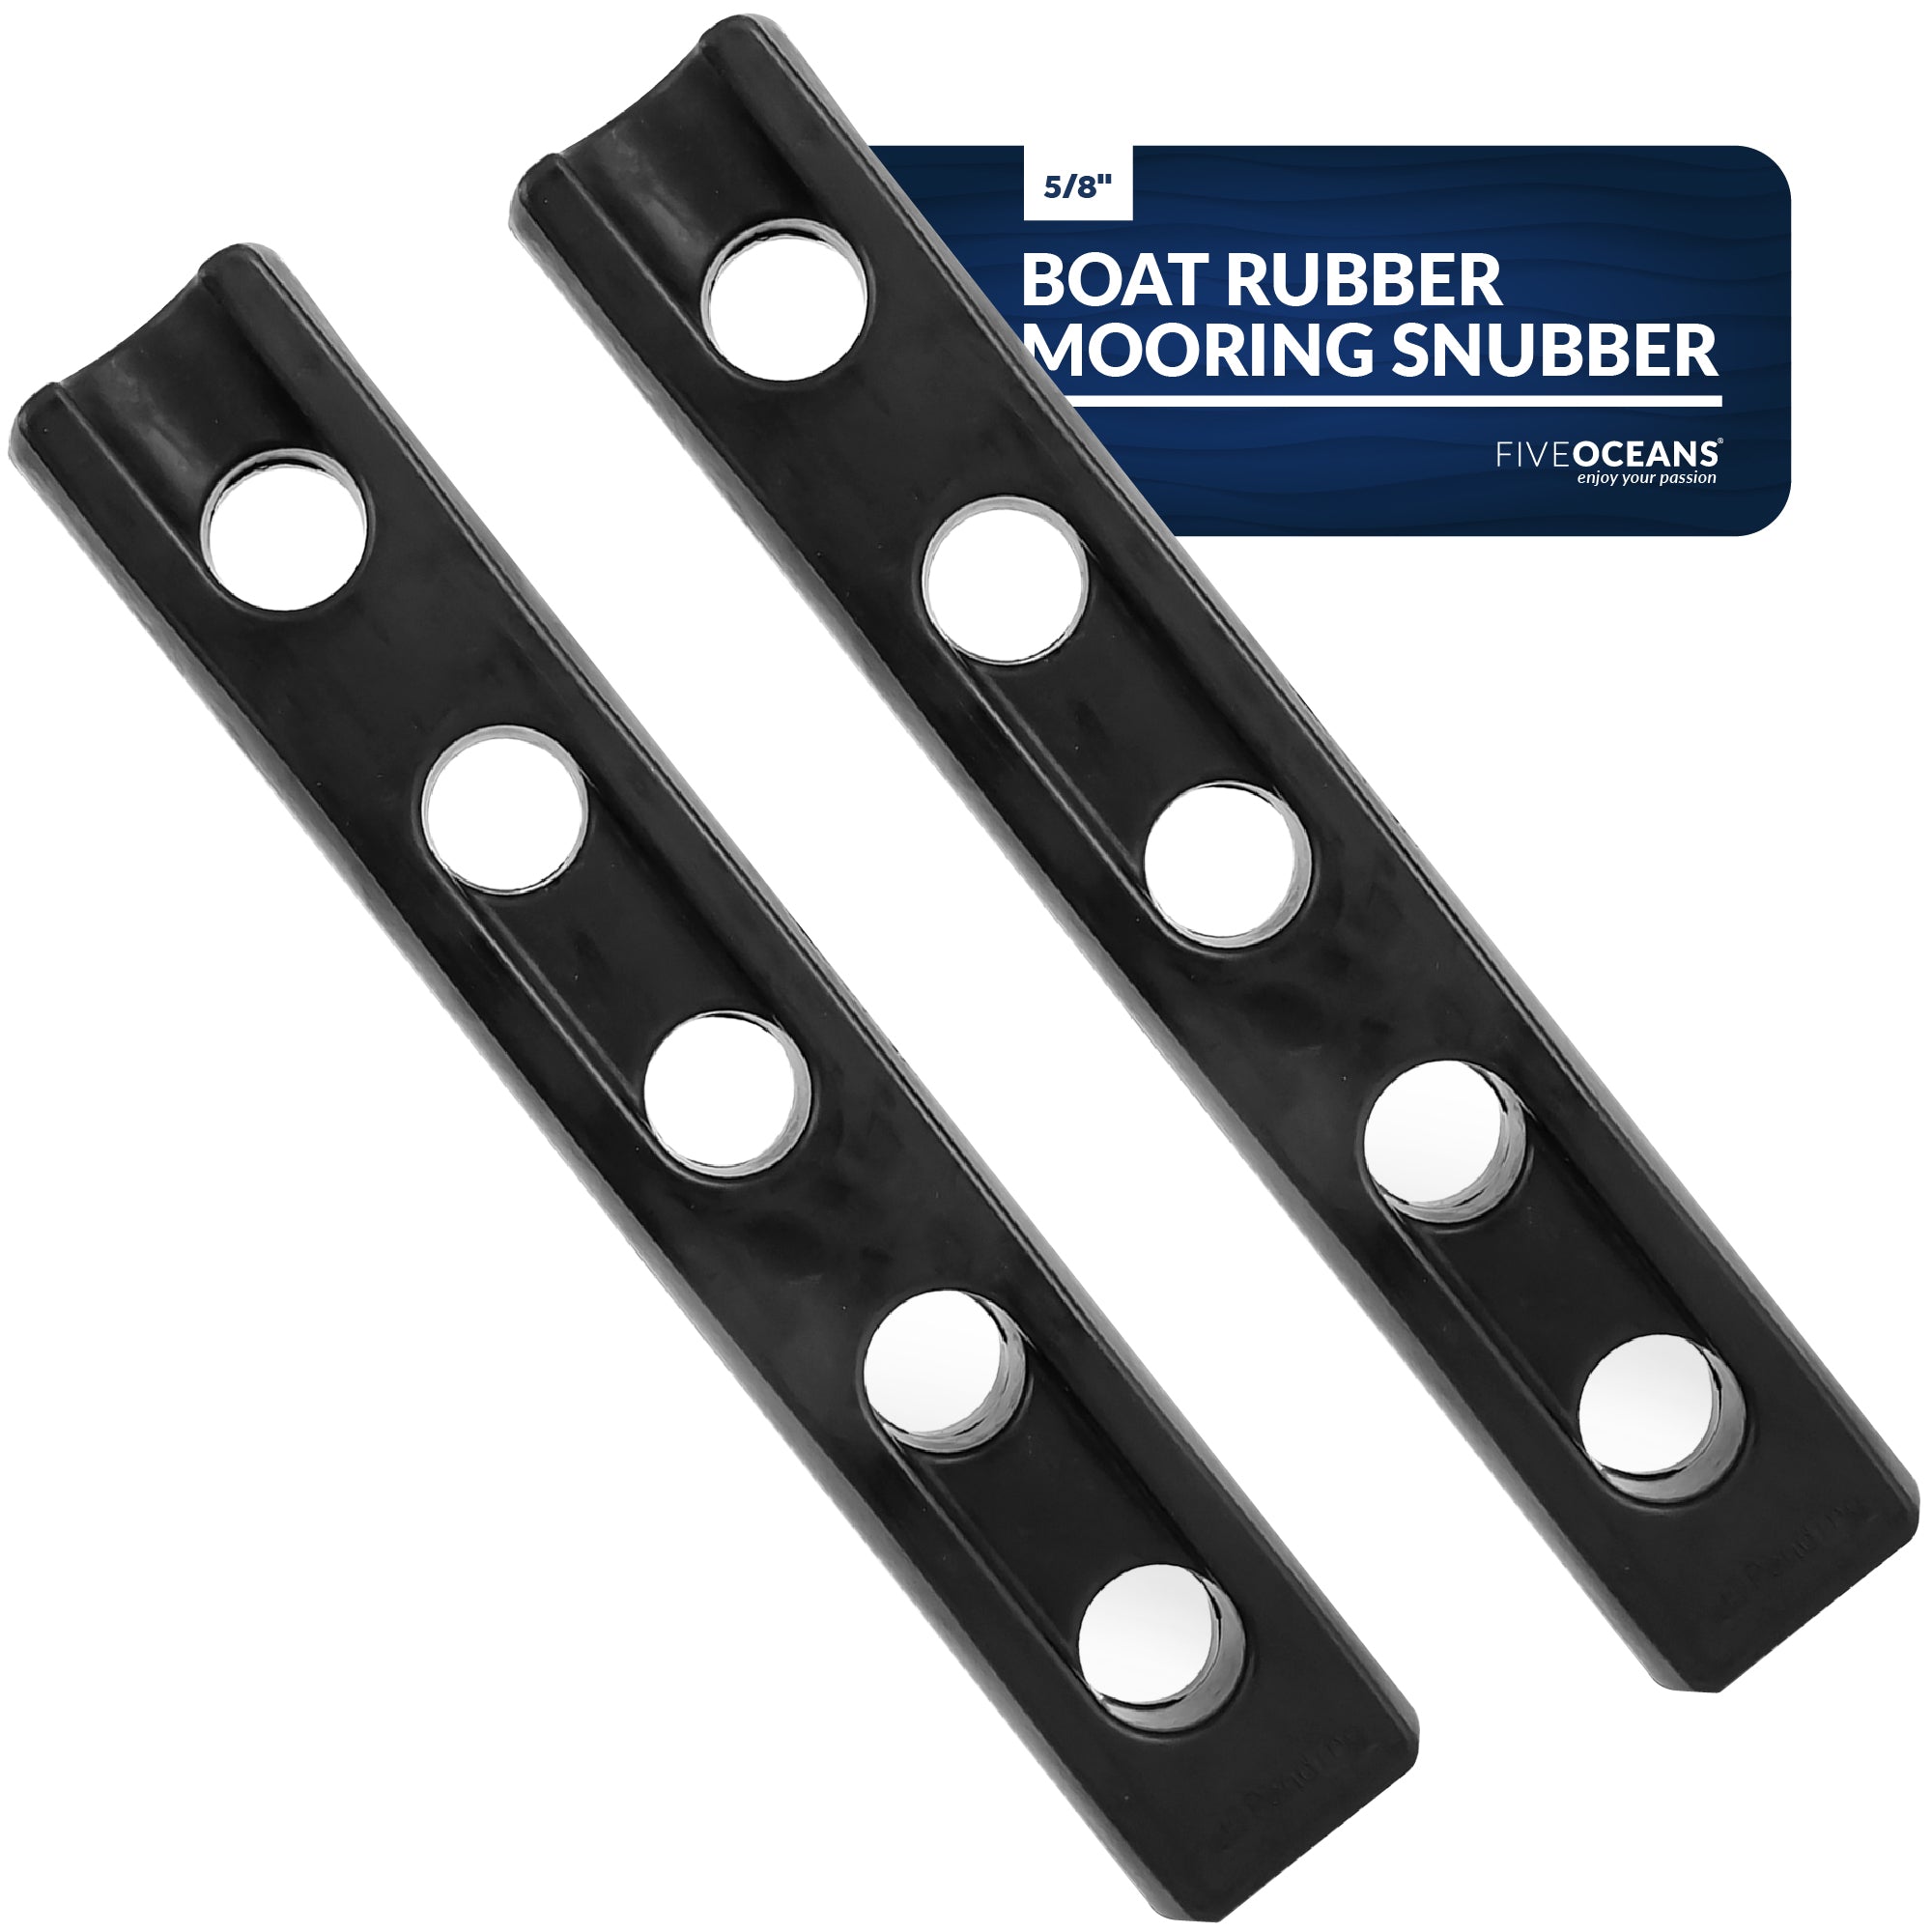 Boat Rubber Mooring Snubber, Compatible with 5/8 in - 13/16 in Dock Lines, Made of EPDM Rubber, UV-Resistant, Up to 65FT Boats, 2-Pack FO4435-M2